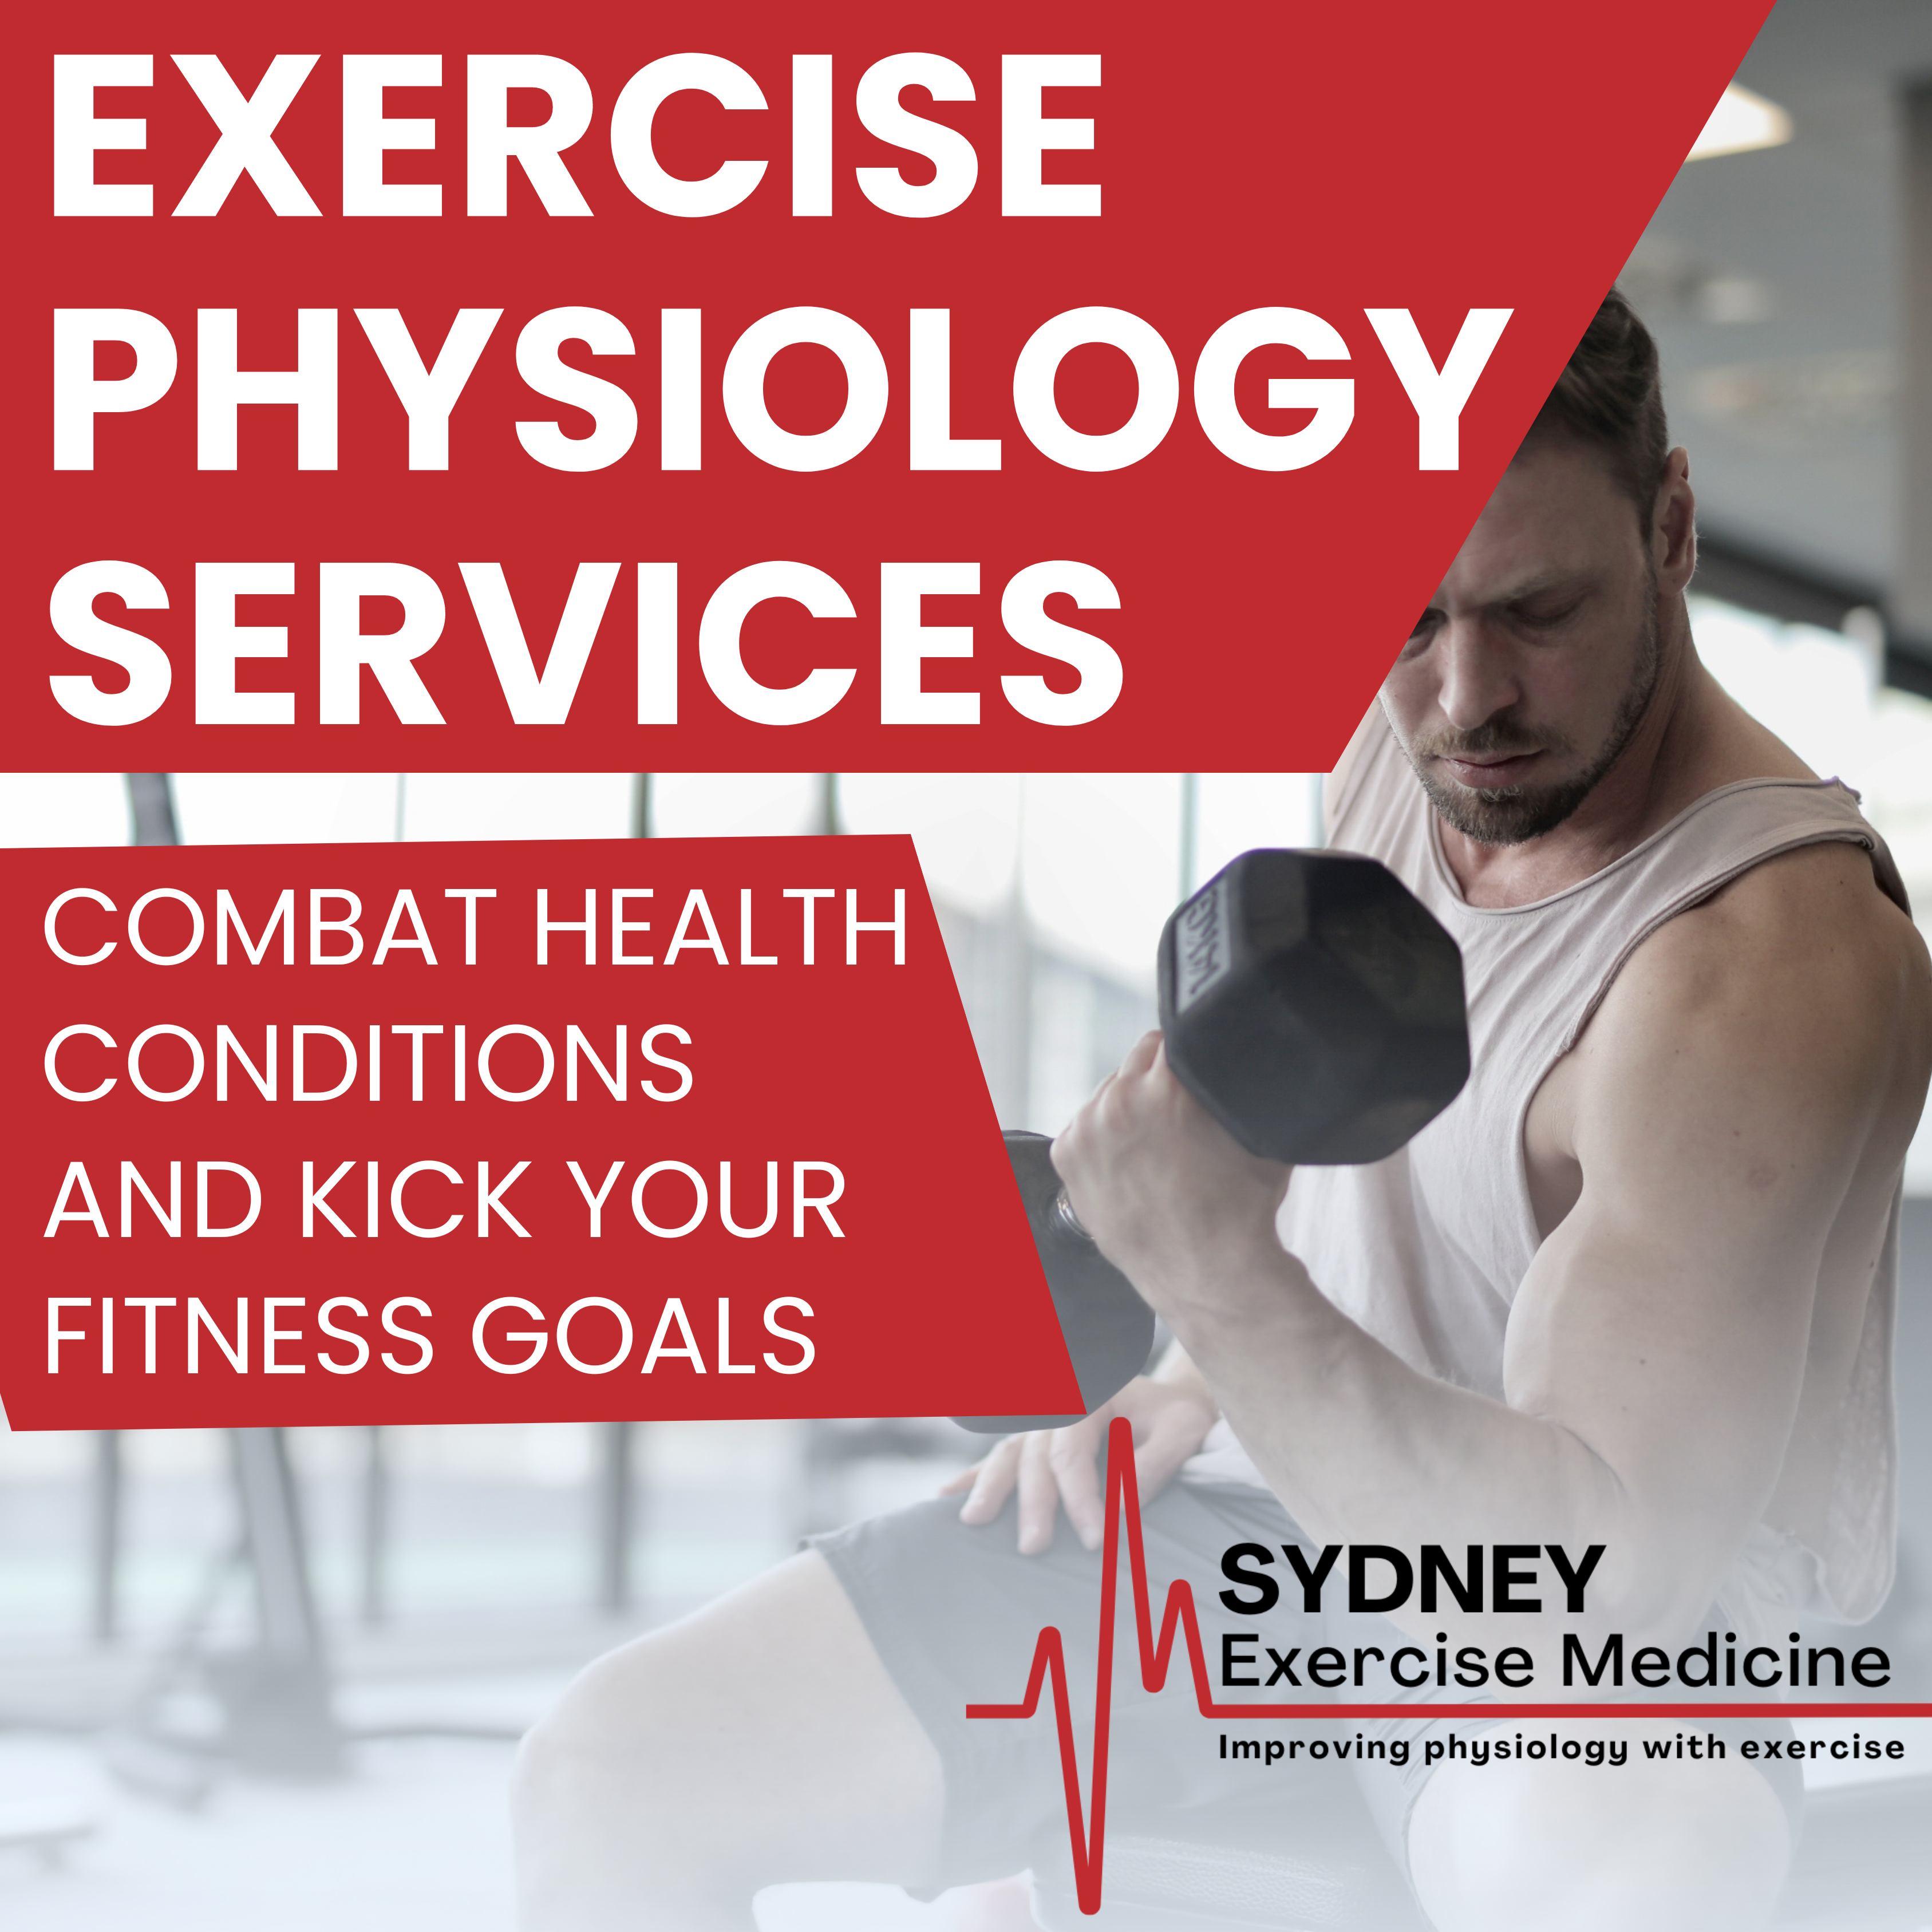 Exercise Physiology Services